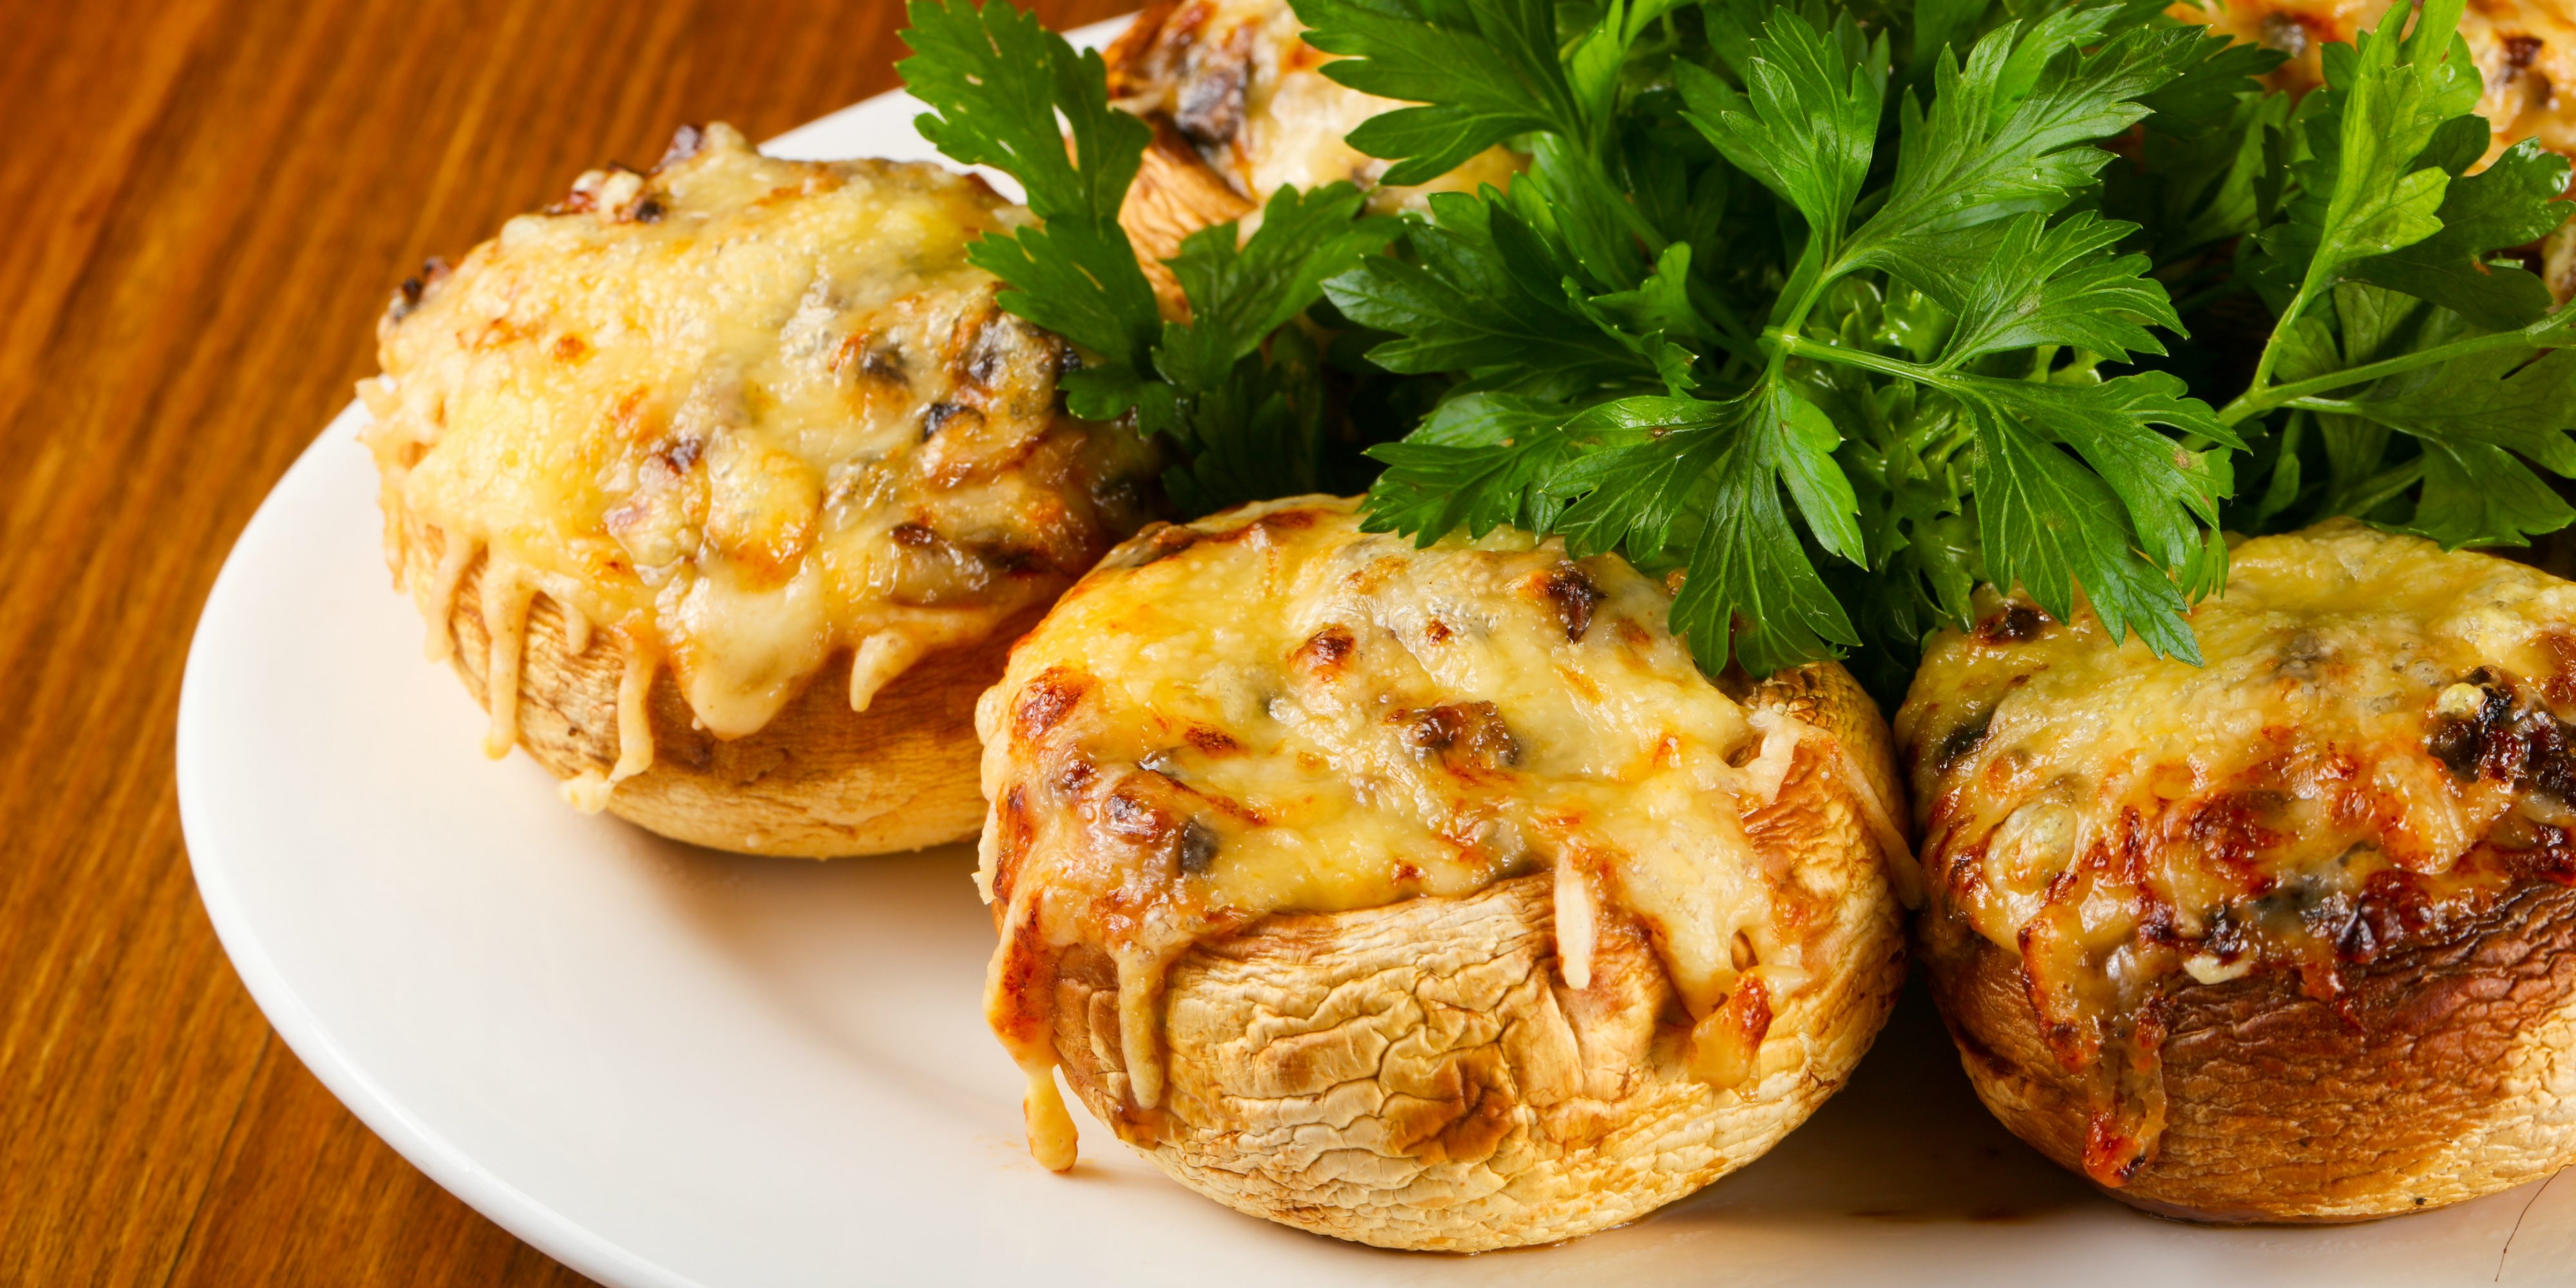 10 easy recipes for stuffed champignons